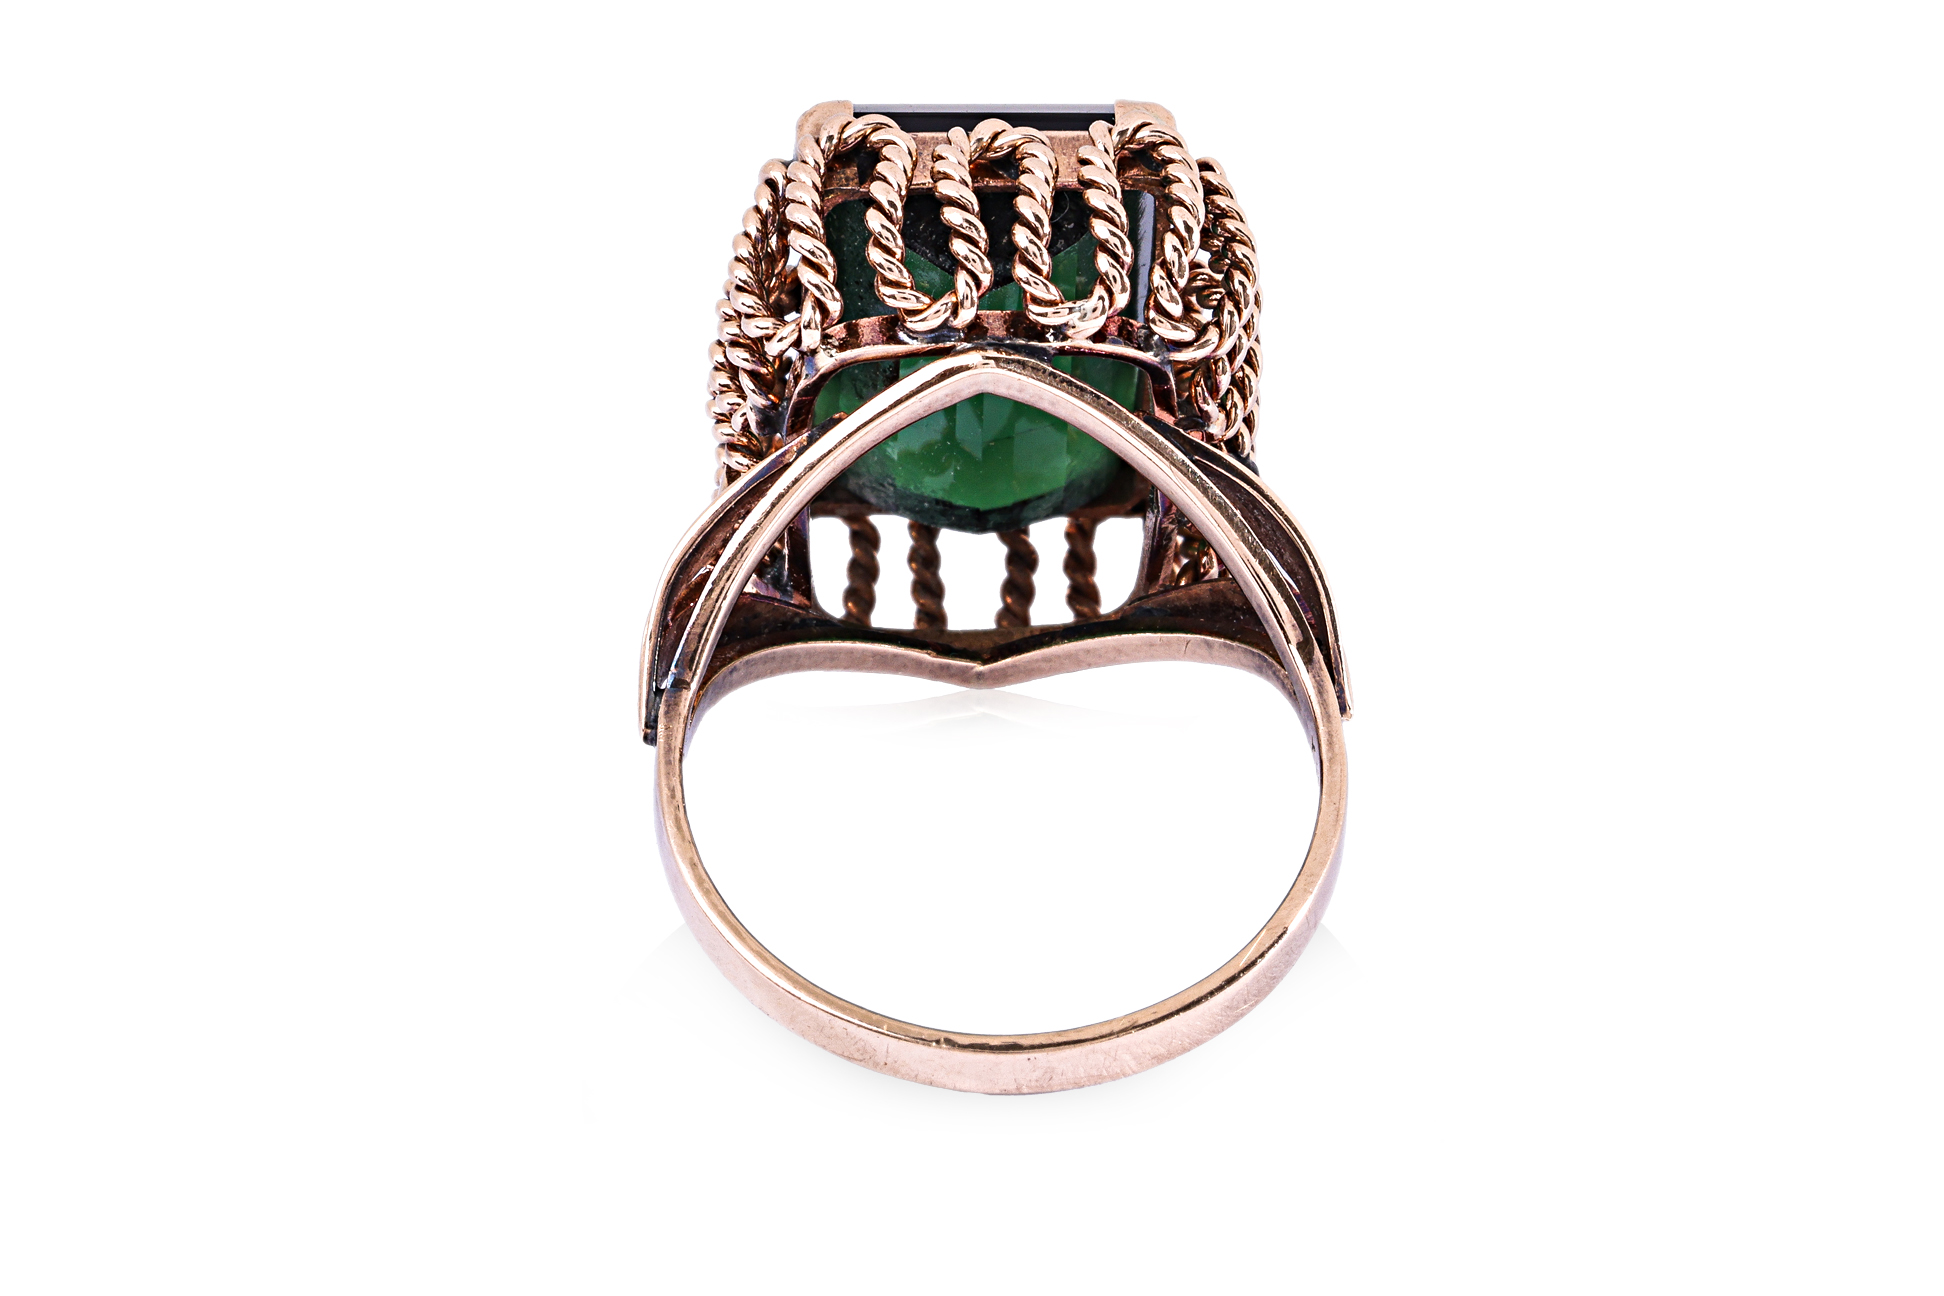 A GREEN TOURMALINE RING - Image 3 of 4